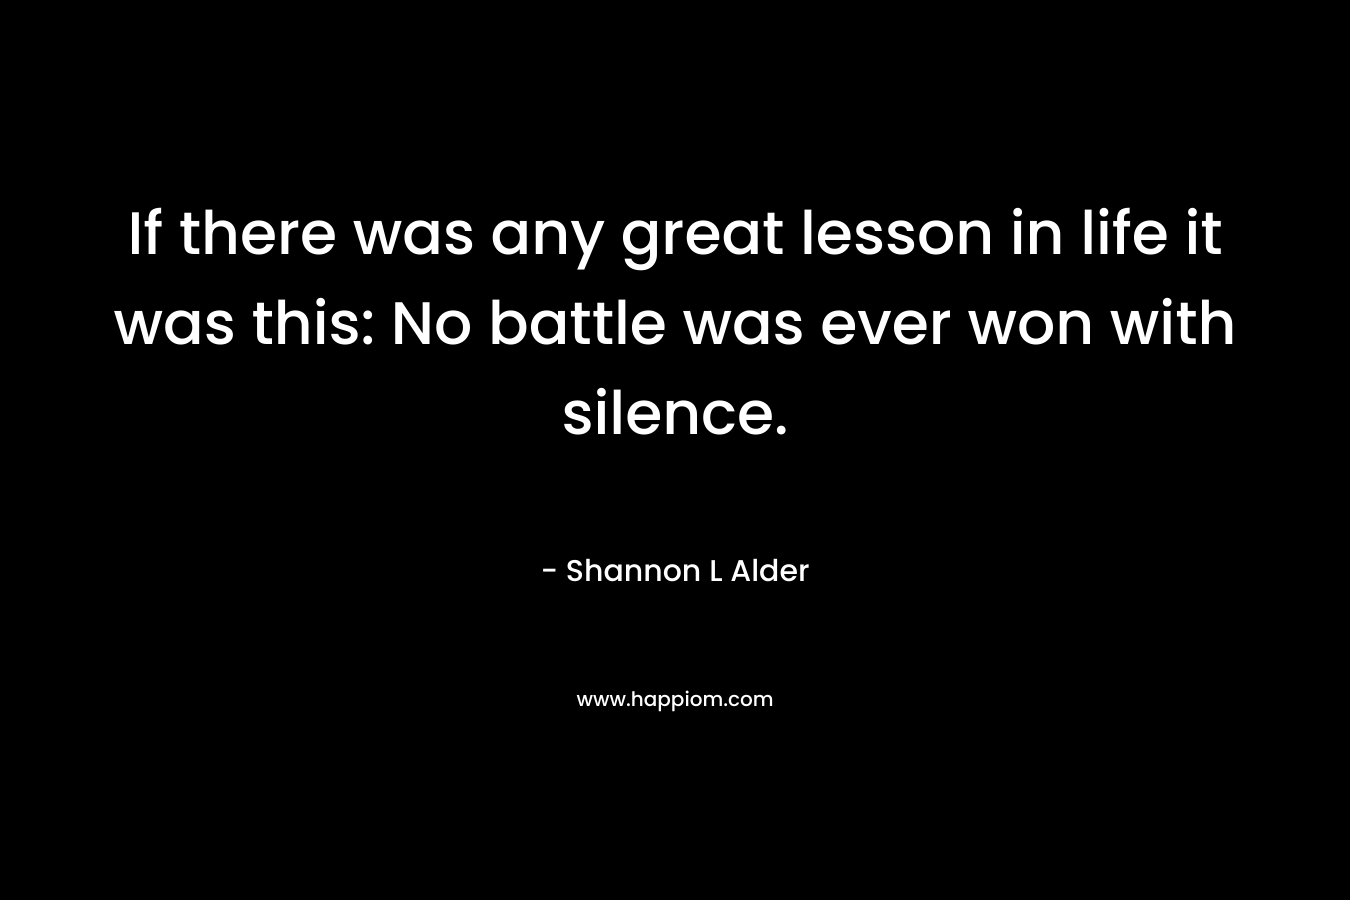 If there was any great lesson in life it was this: No battle was ever won with silence.